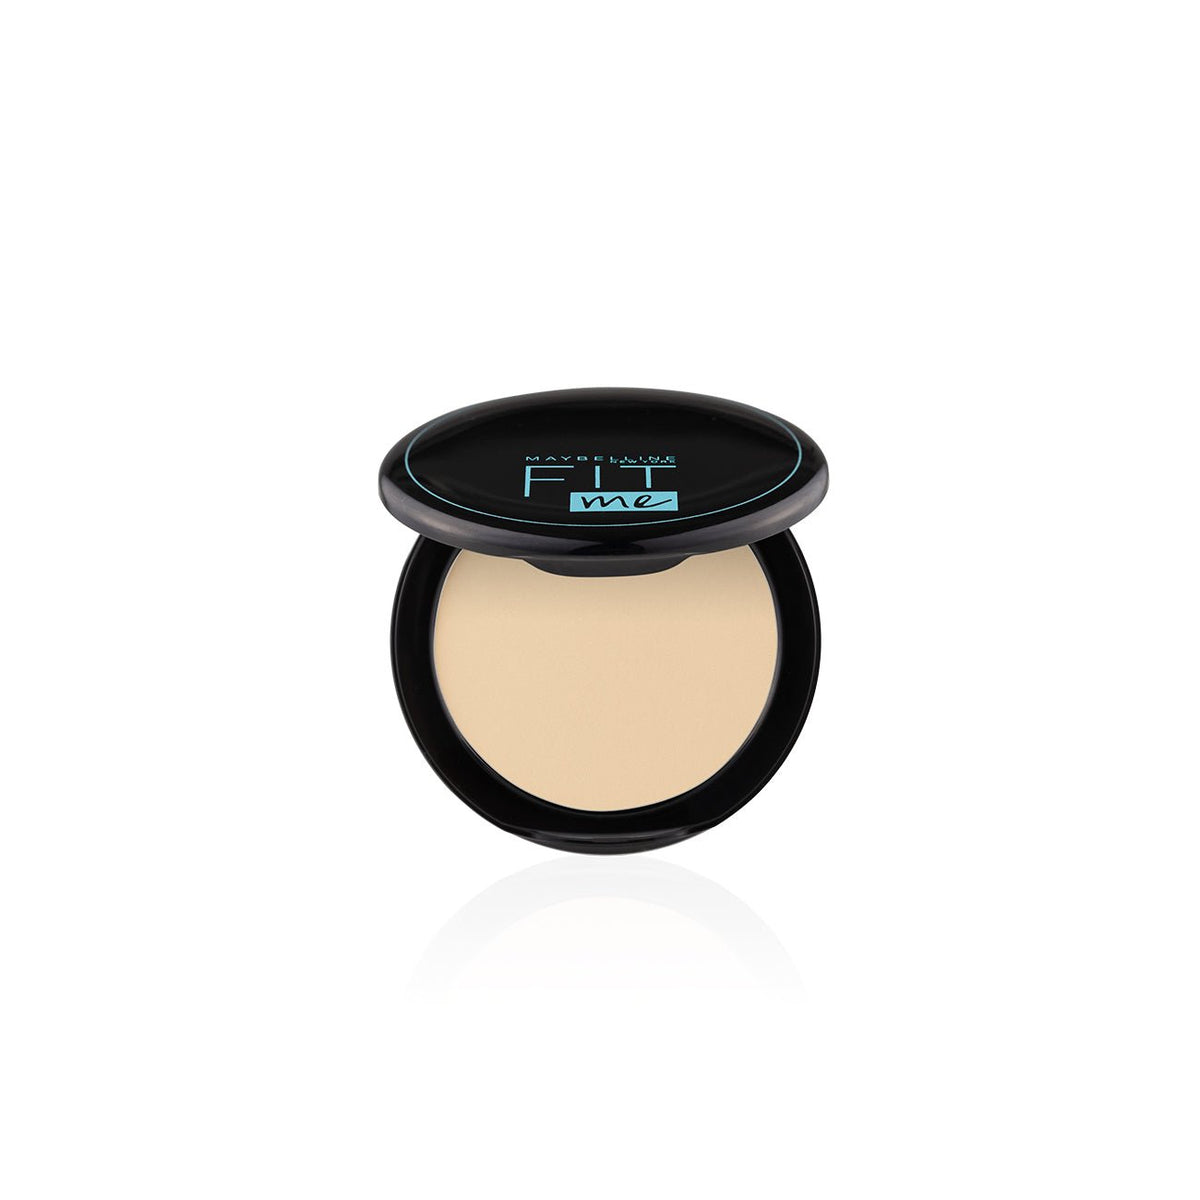 Maybelline Fit Me Compact Powder 109 Light Ivory - AllurebeautypkMaybelline Fit Me Compact Powder 109 Light Ivory